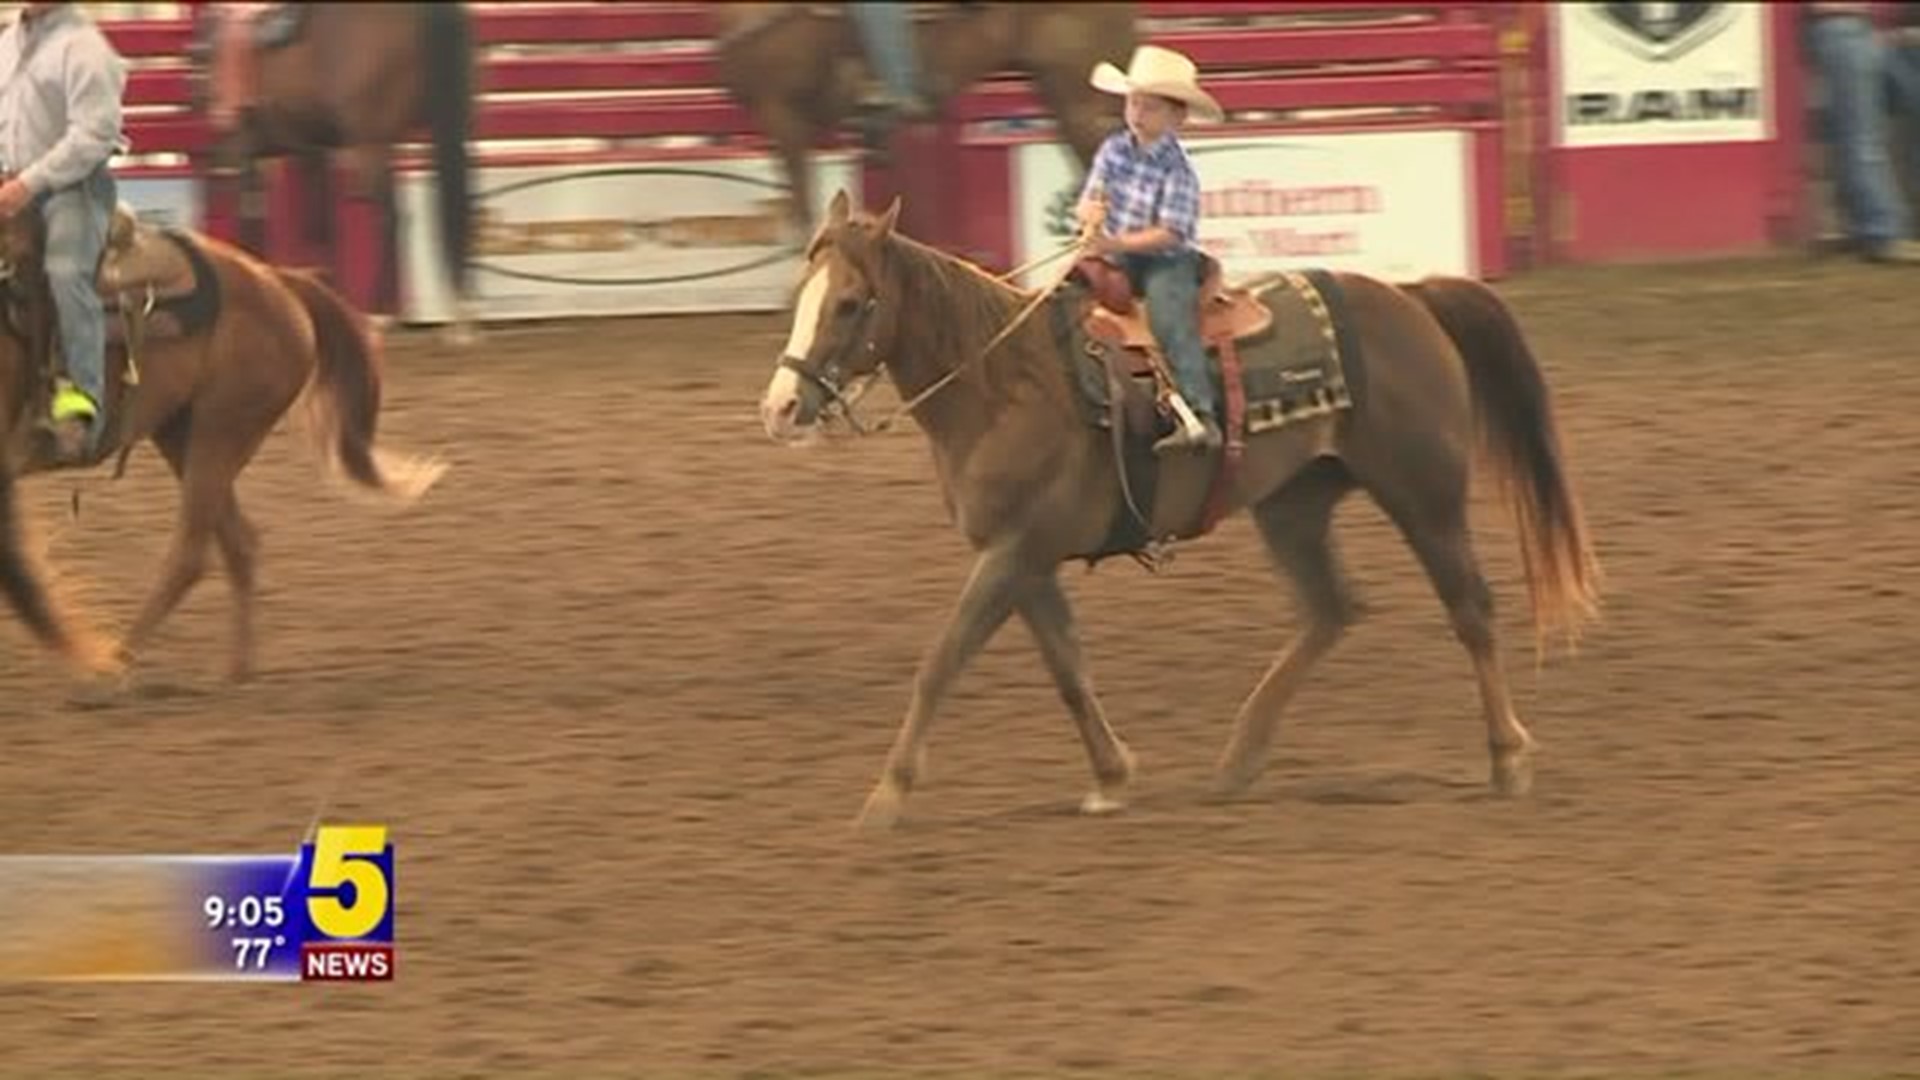 OLD FORT DAYS RODEO COMES TO AN END